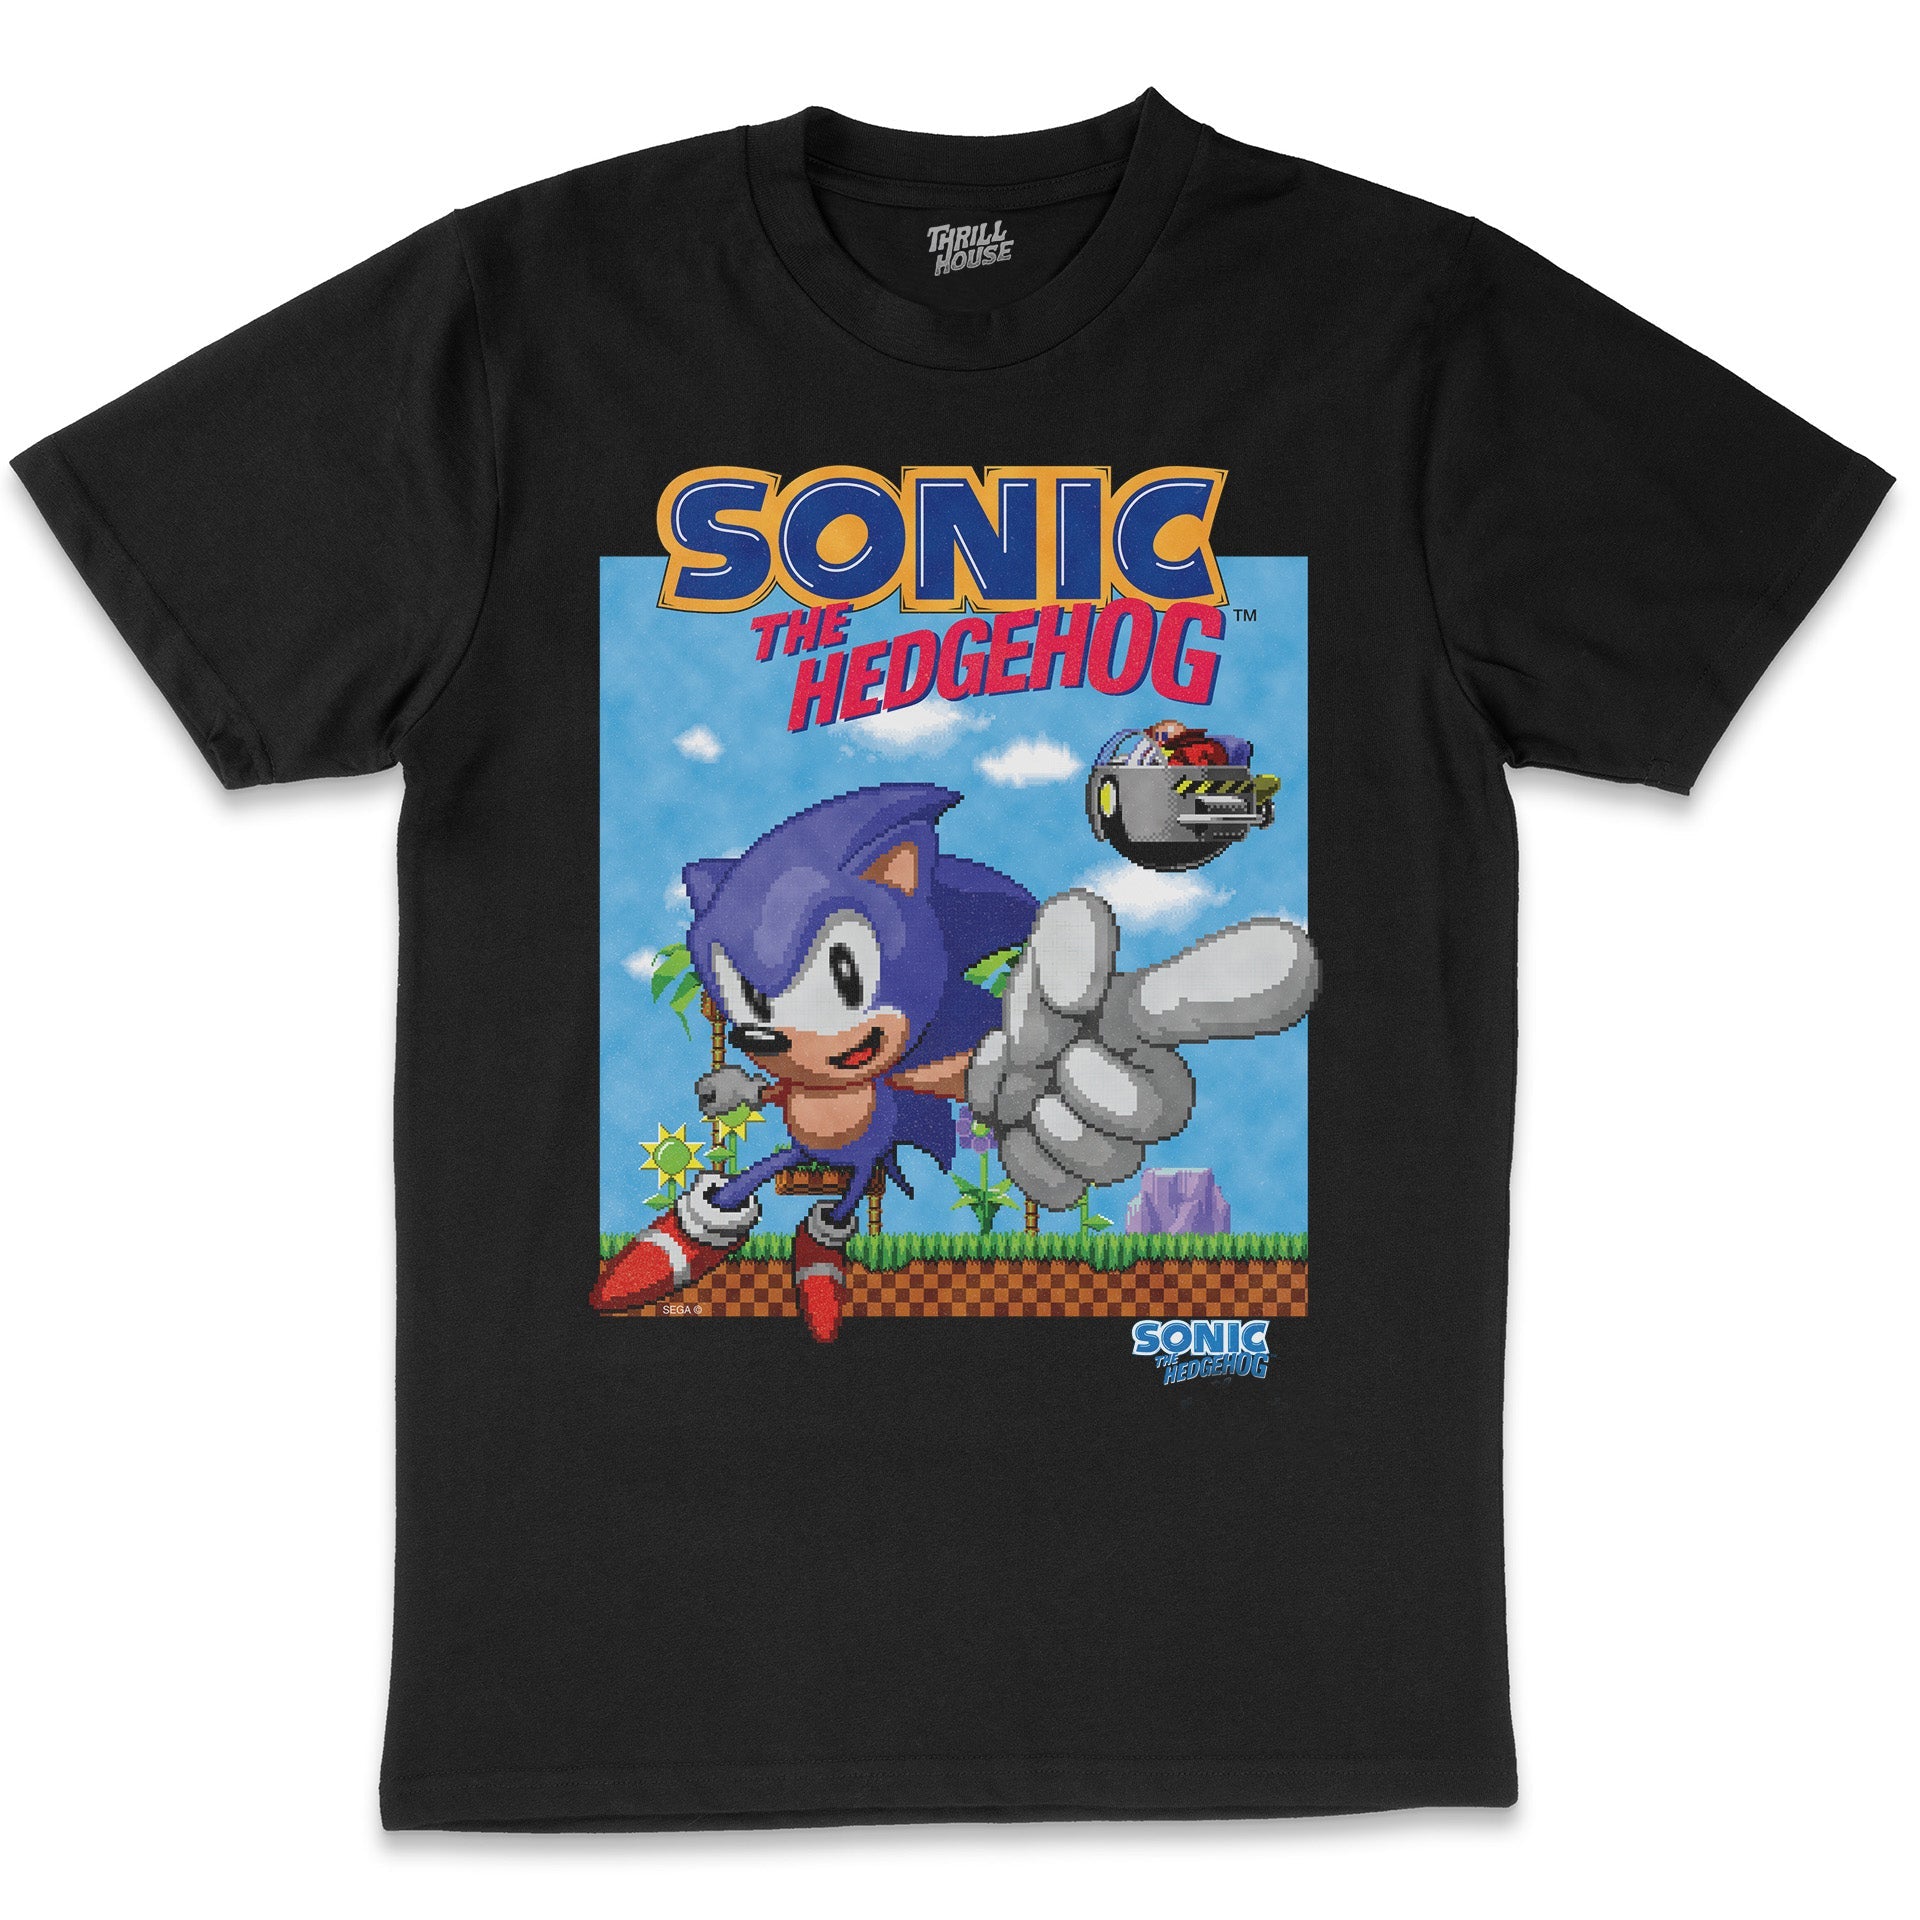 Sonic The Hedgehog Dr Eggman Retro 90s Video Game Cartridge Console Officially Licensed SEGA T-Shirt